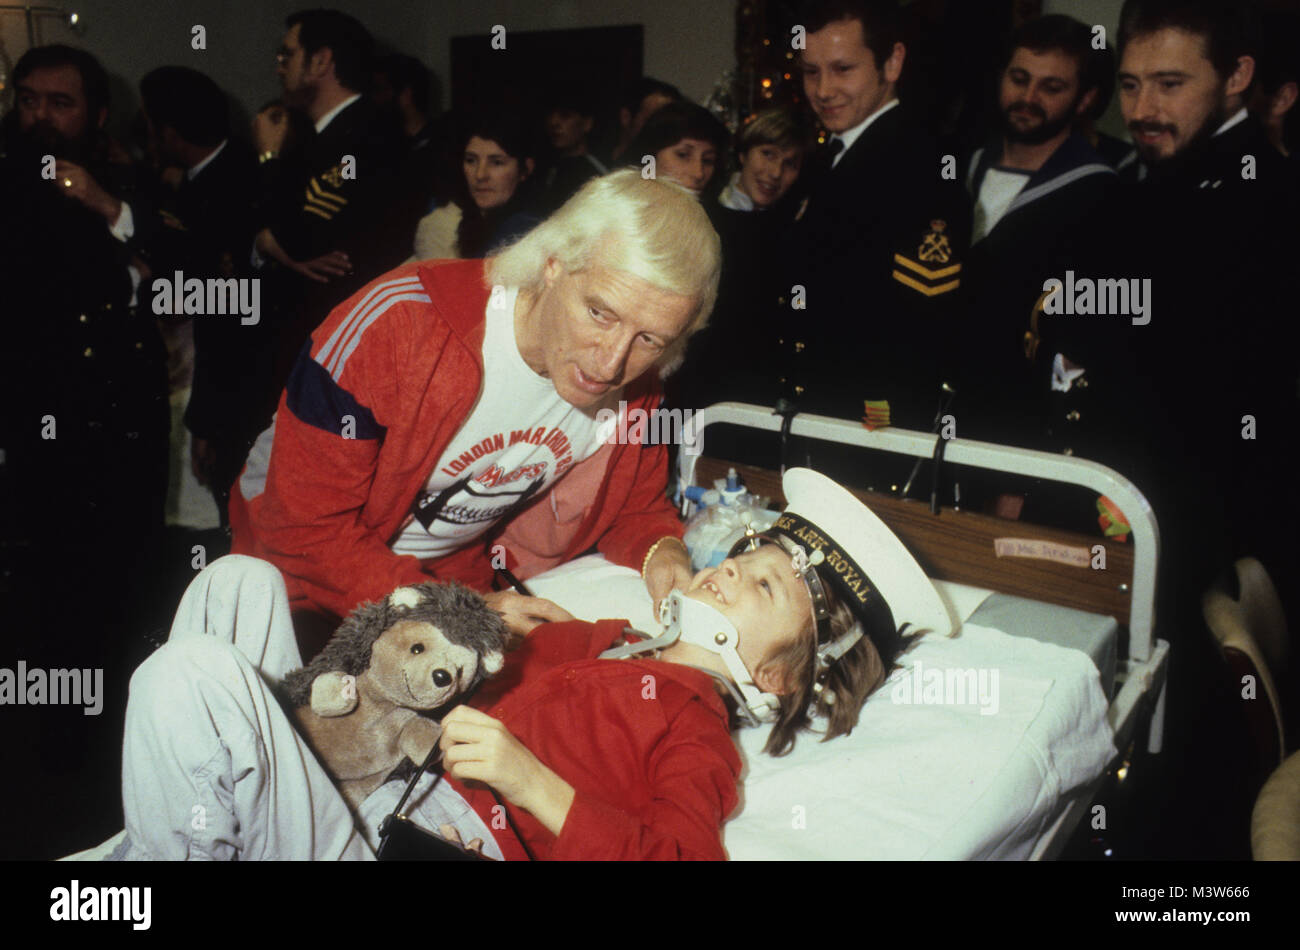 jimmy-savile-visiting-children-at-great-ormond-street-hospital-for-M3W666.jpeg